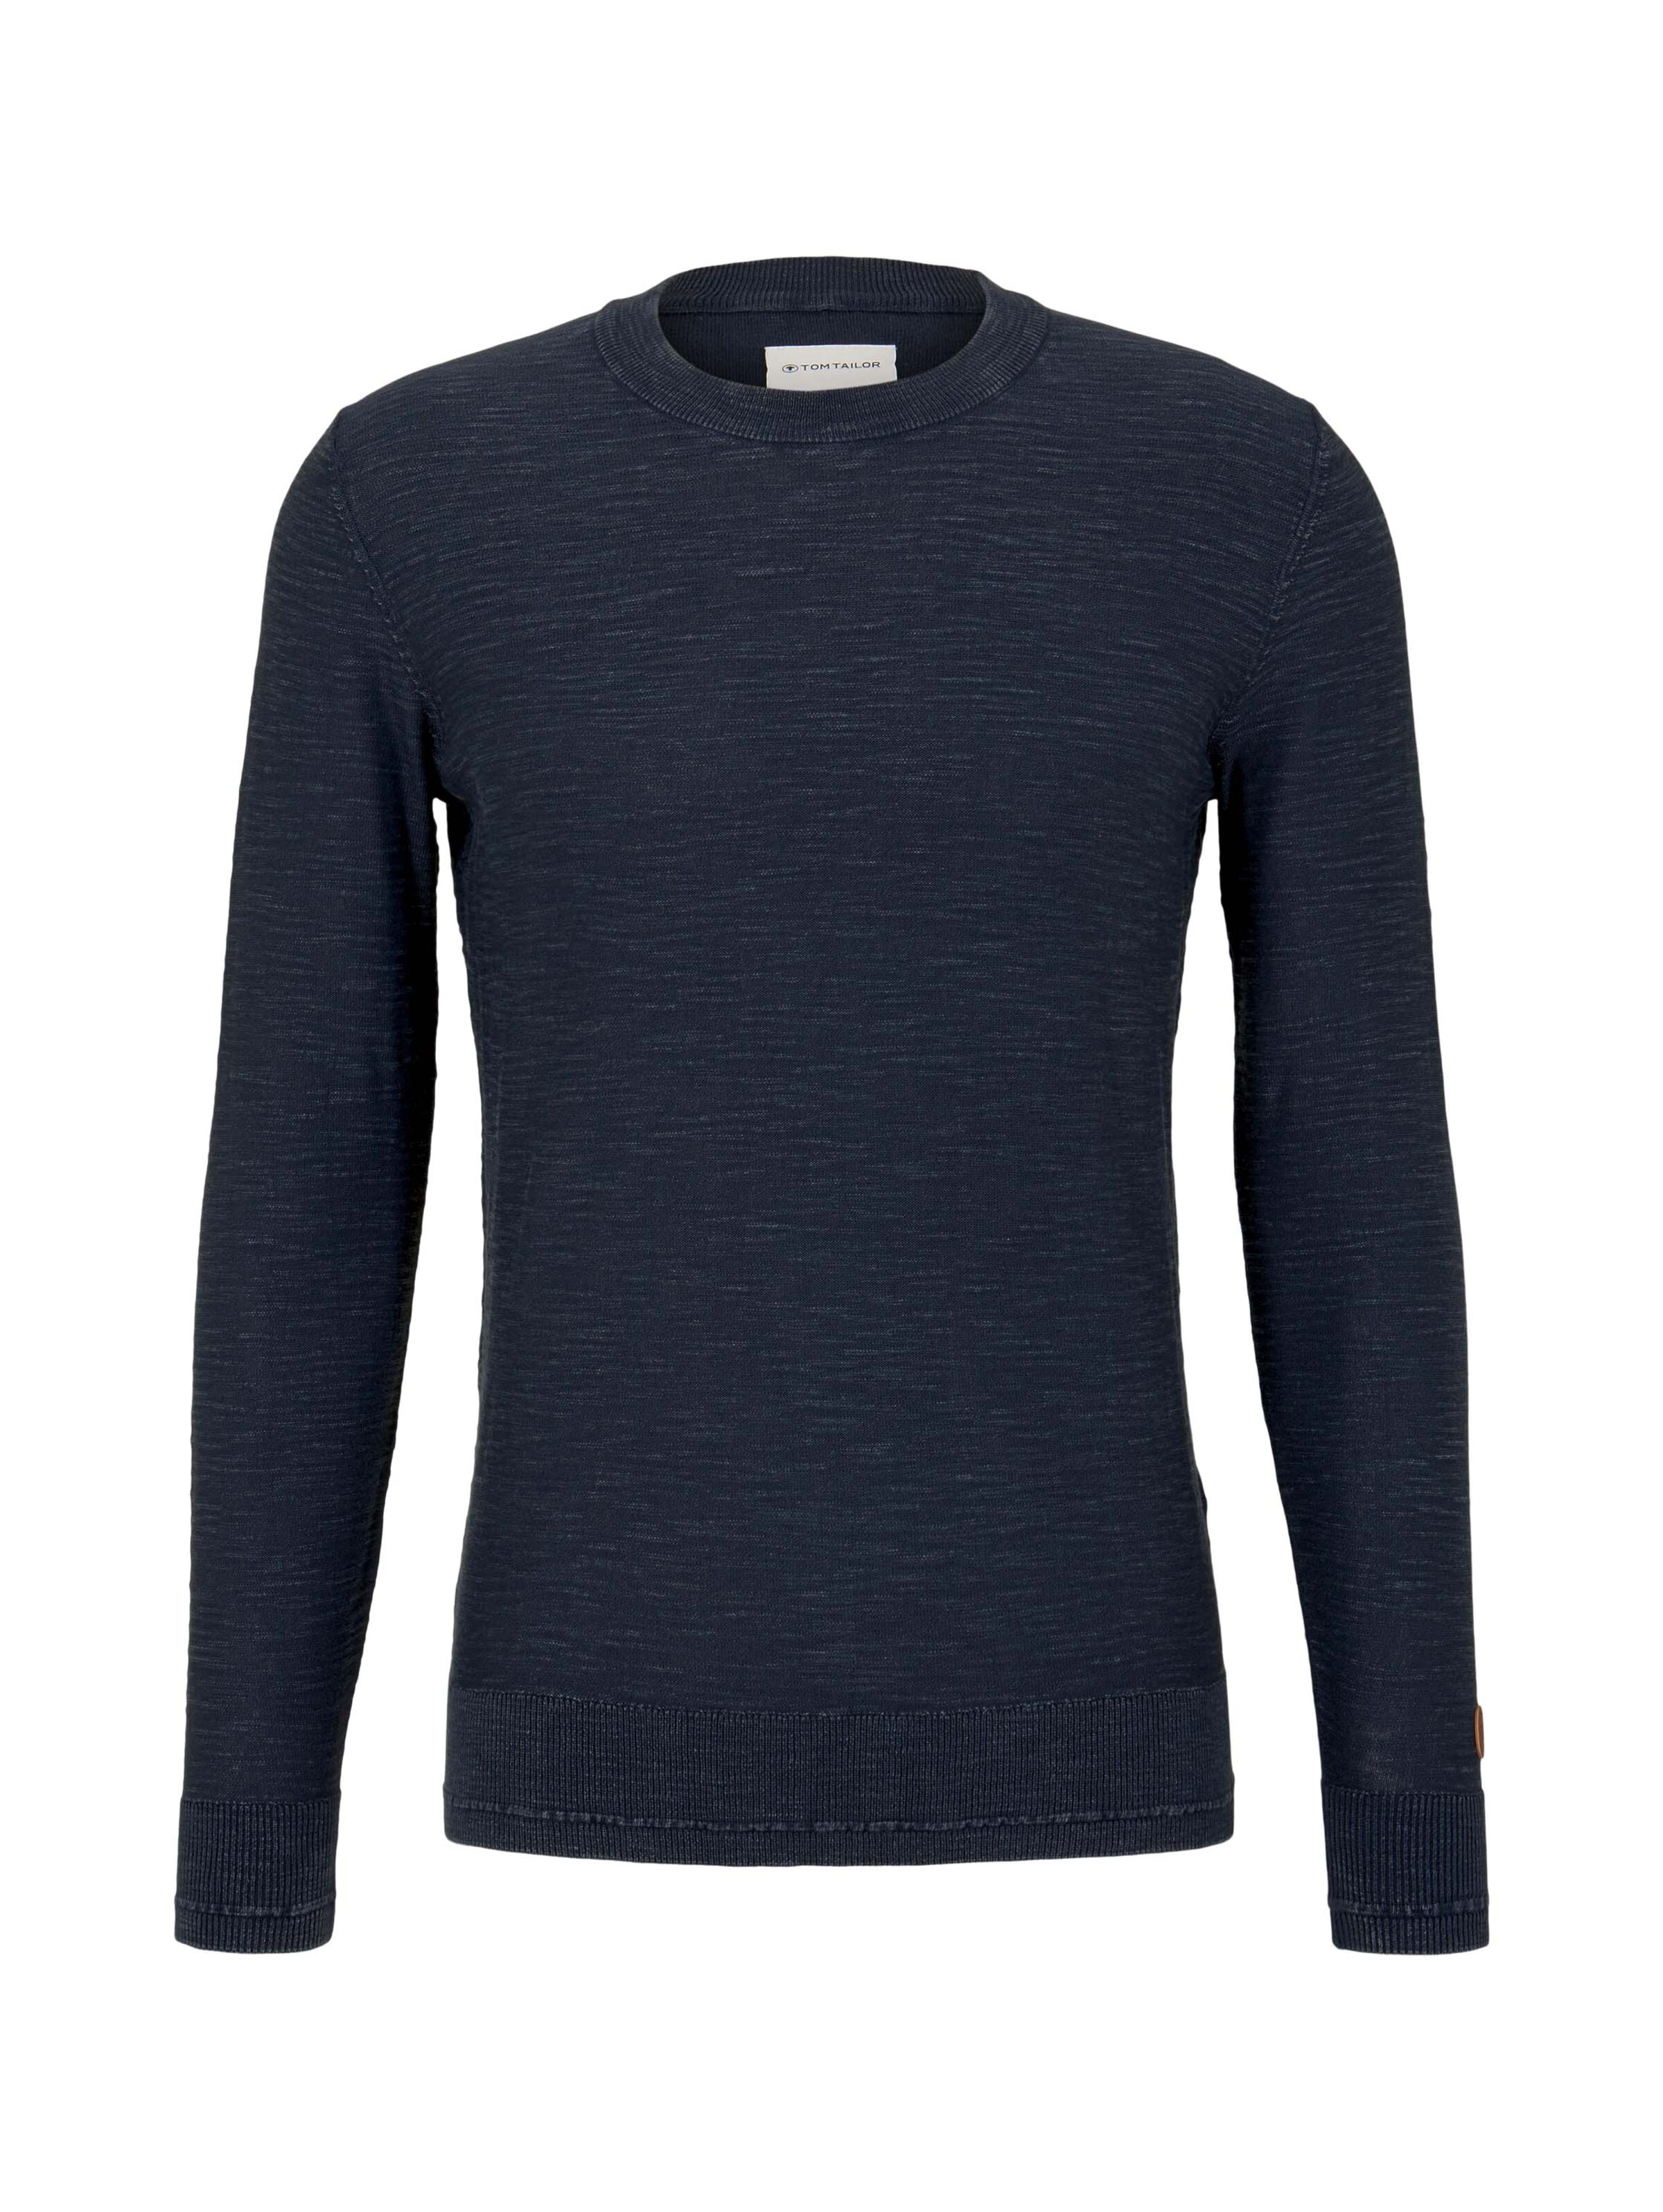 jhCcY Pullover TOM TAILOR Pullover in Navy 